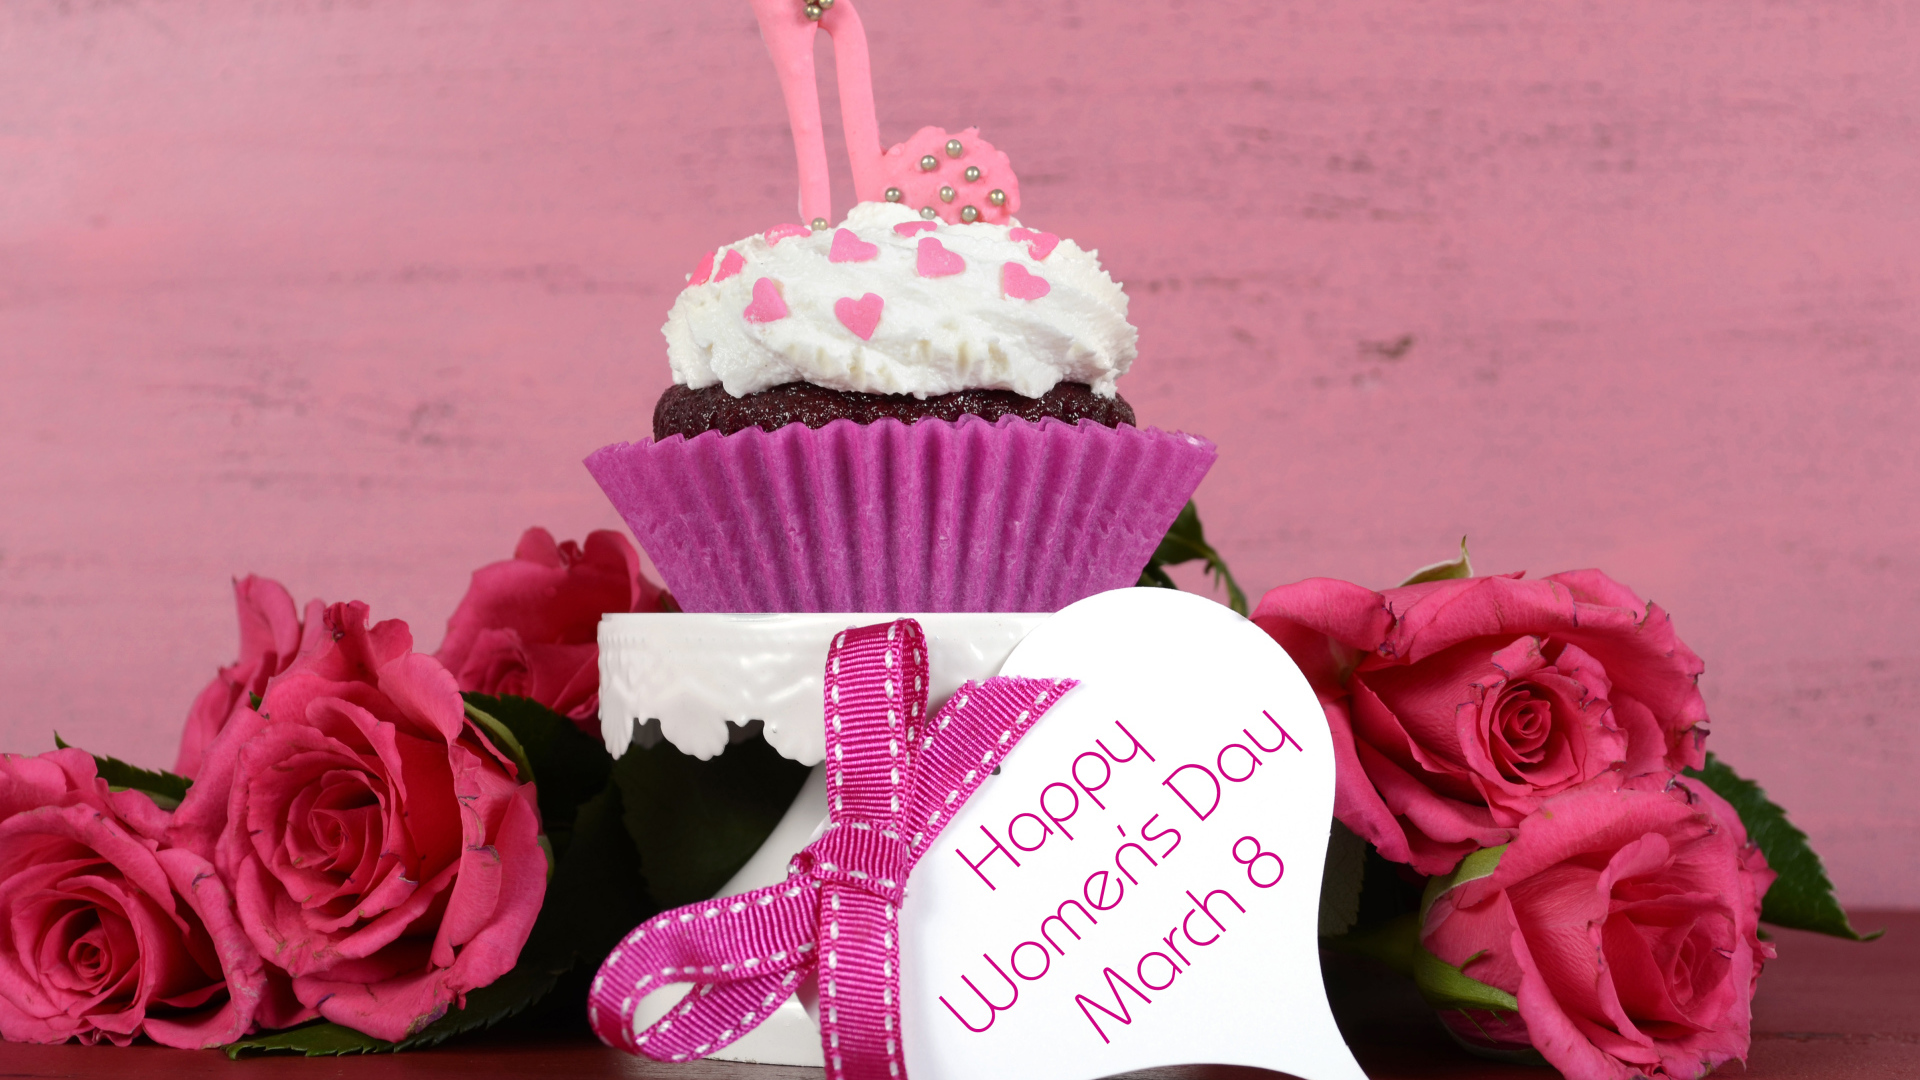 Sweet Cupcake and Flowers for International Women's Day March 8